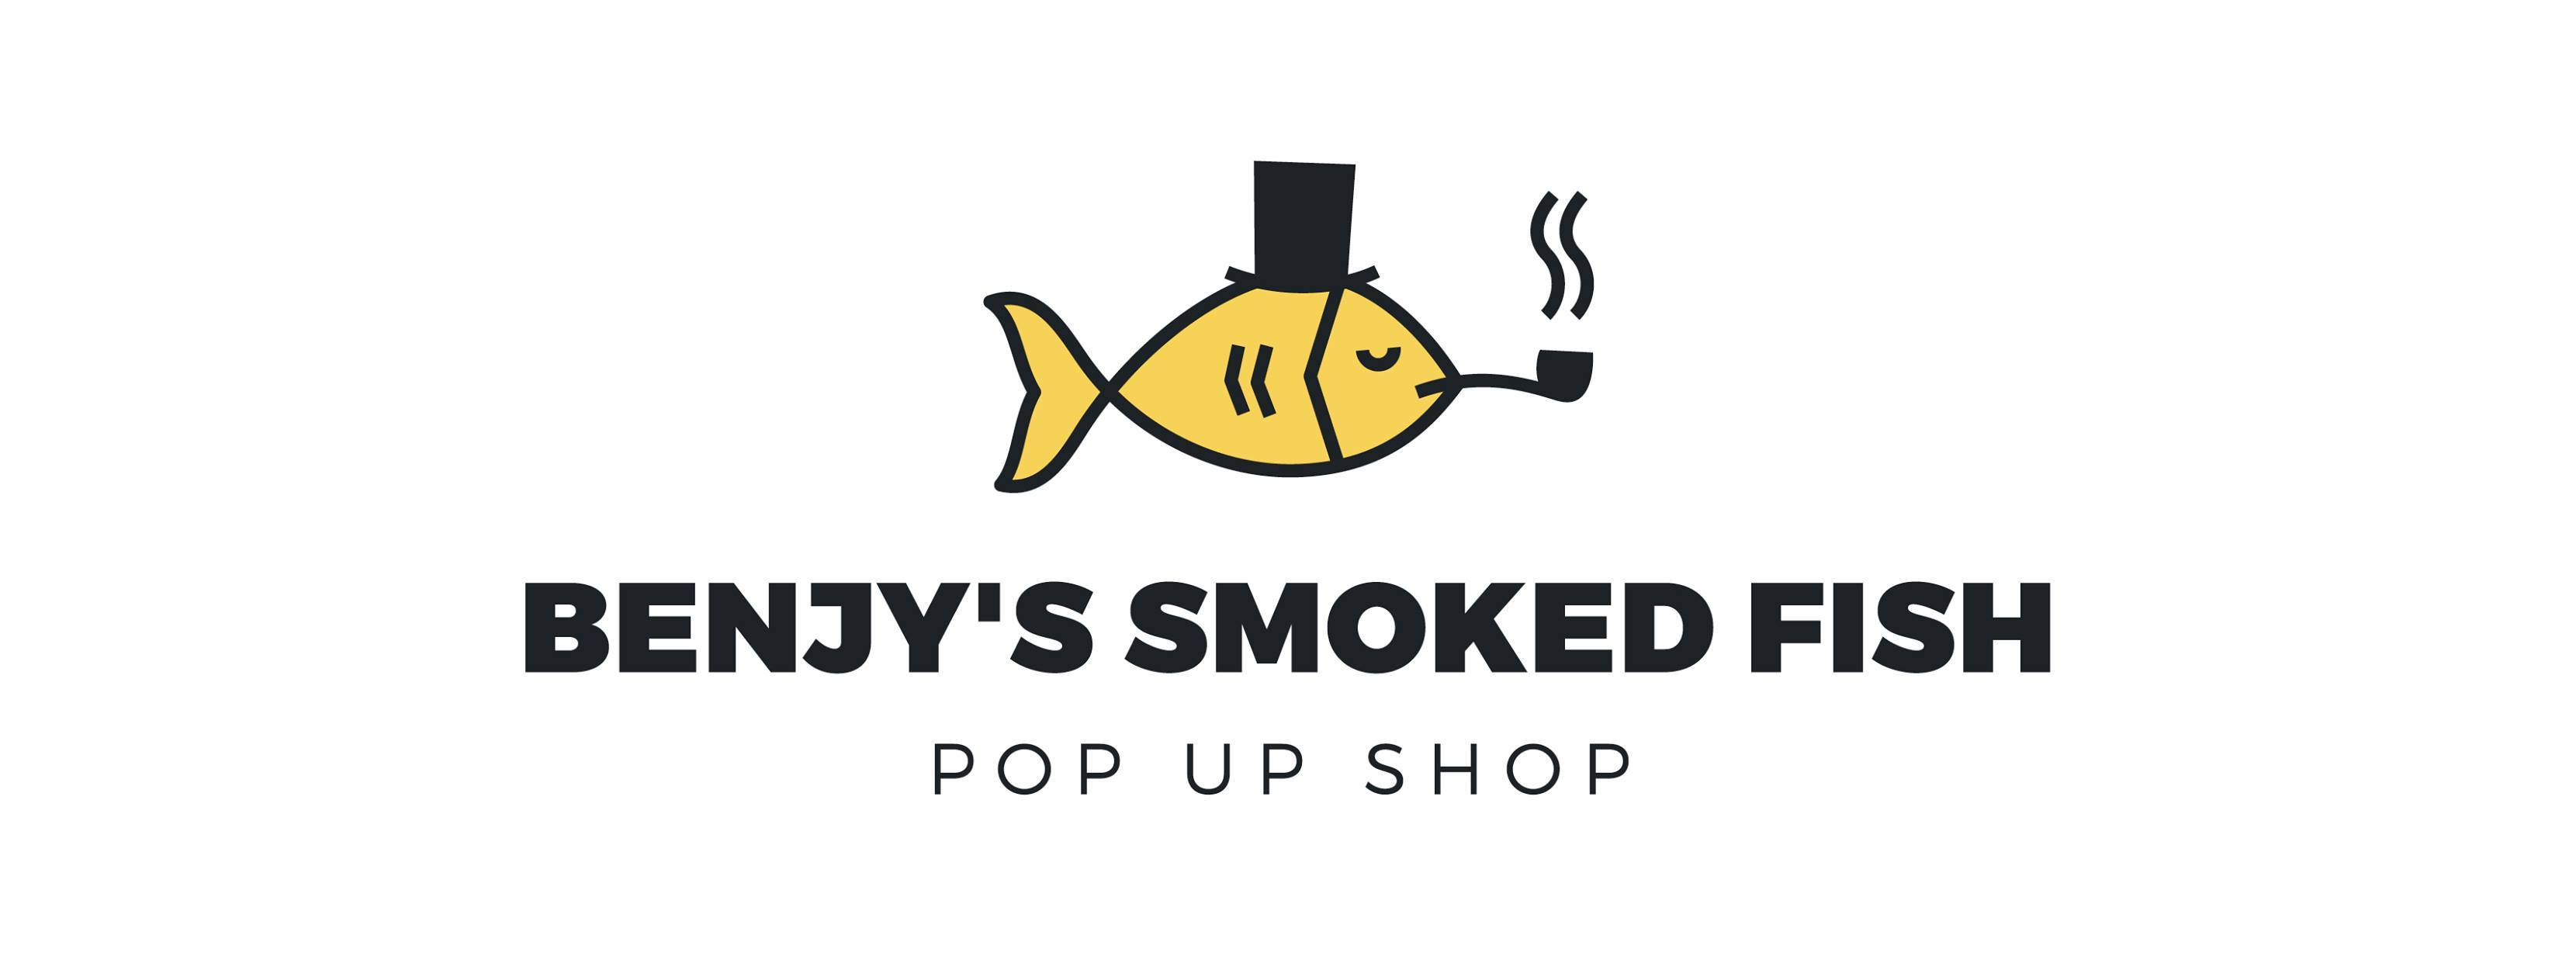 Smoked Fish Pop Up Shop In Brooklyn!